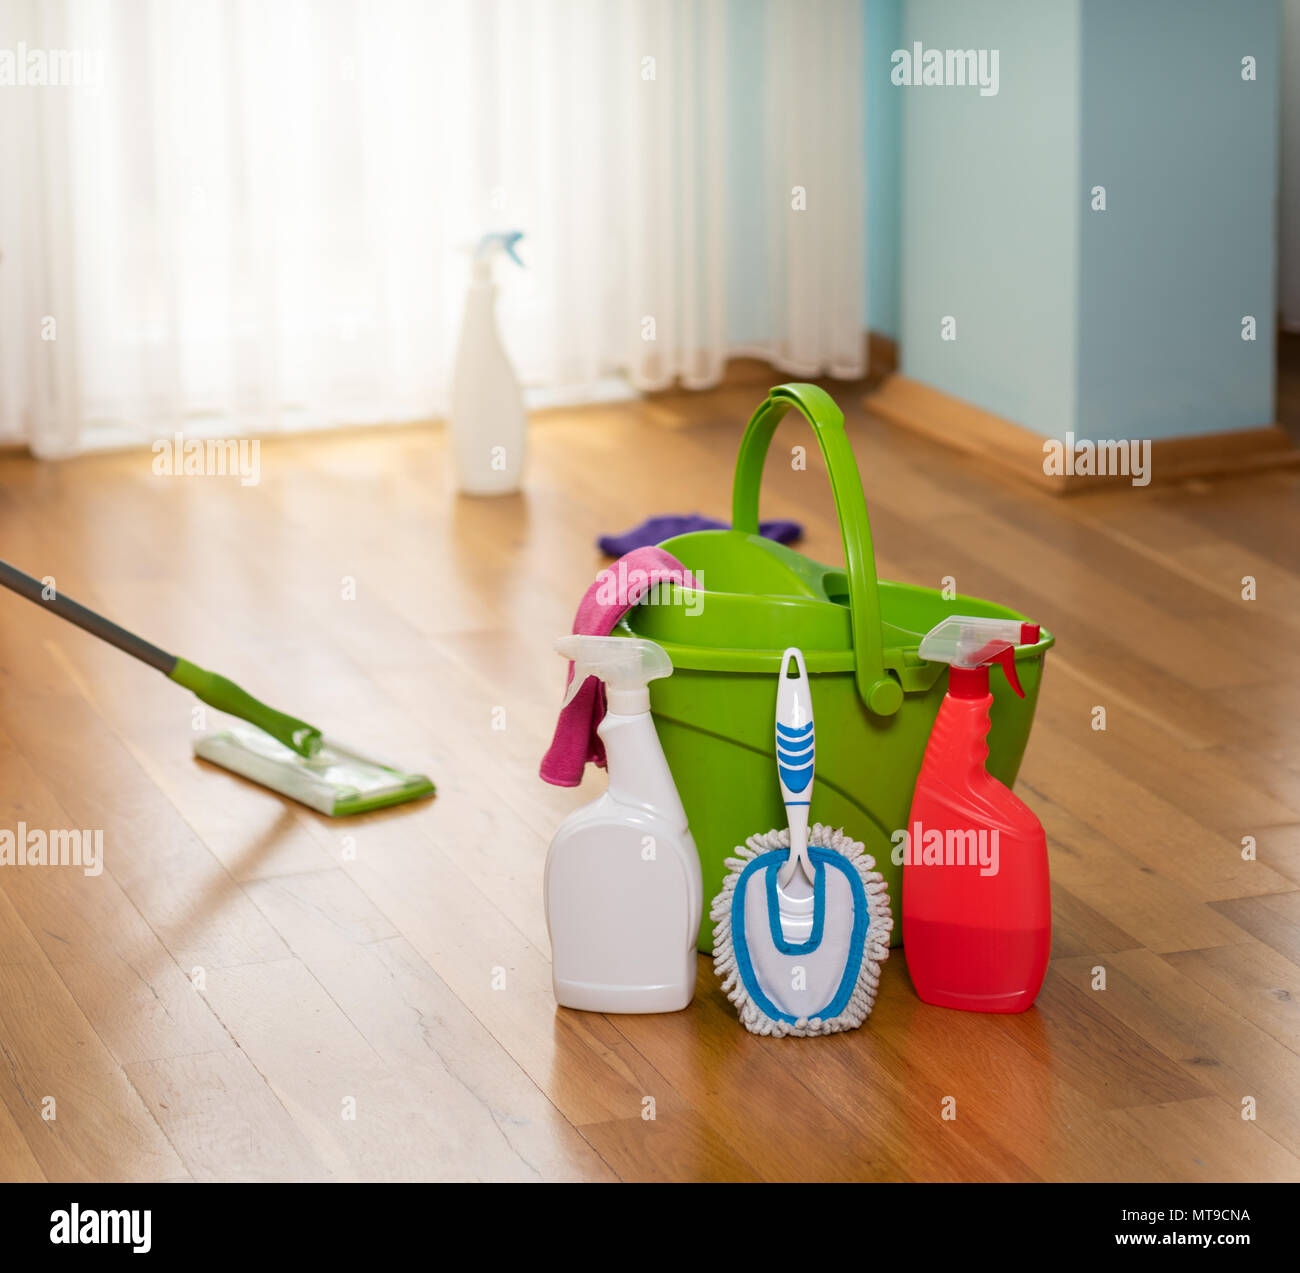 household cleaning materials, buckets, floor cloths, mops and chemical cleaning sprayers Stock Photo